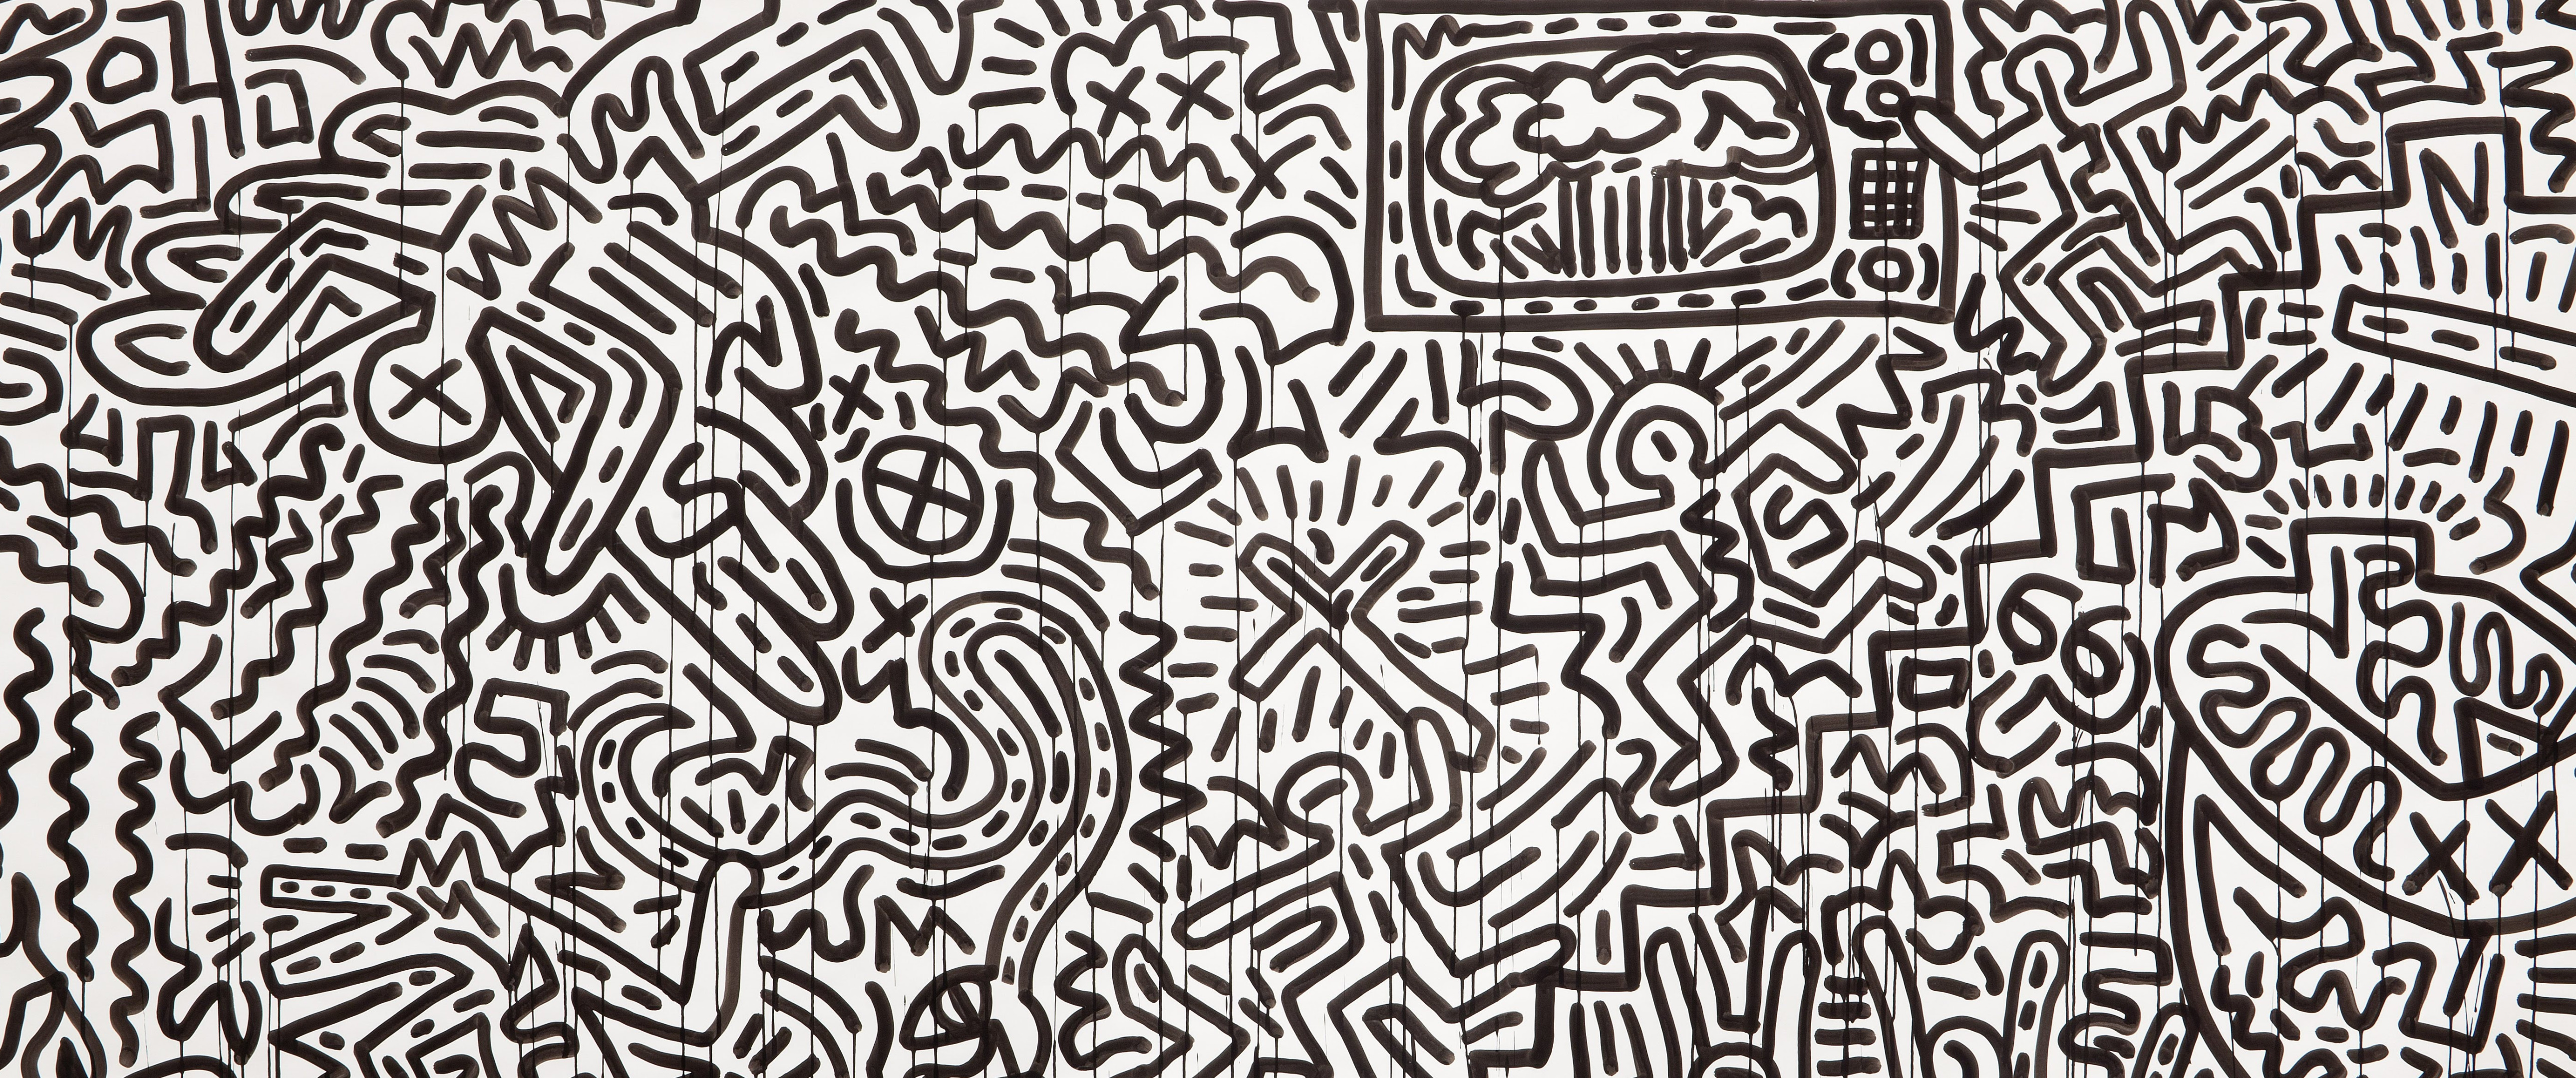 Keith Haring Pop Art Paper Ink Drawing 5160x2160